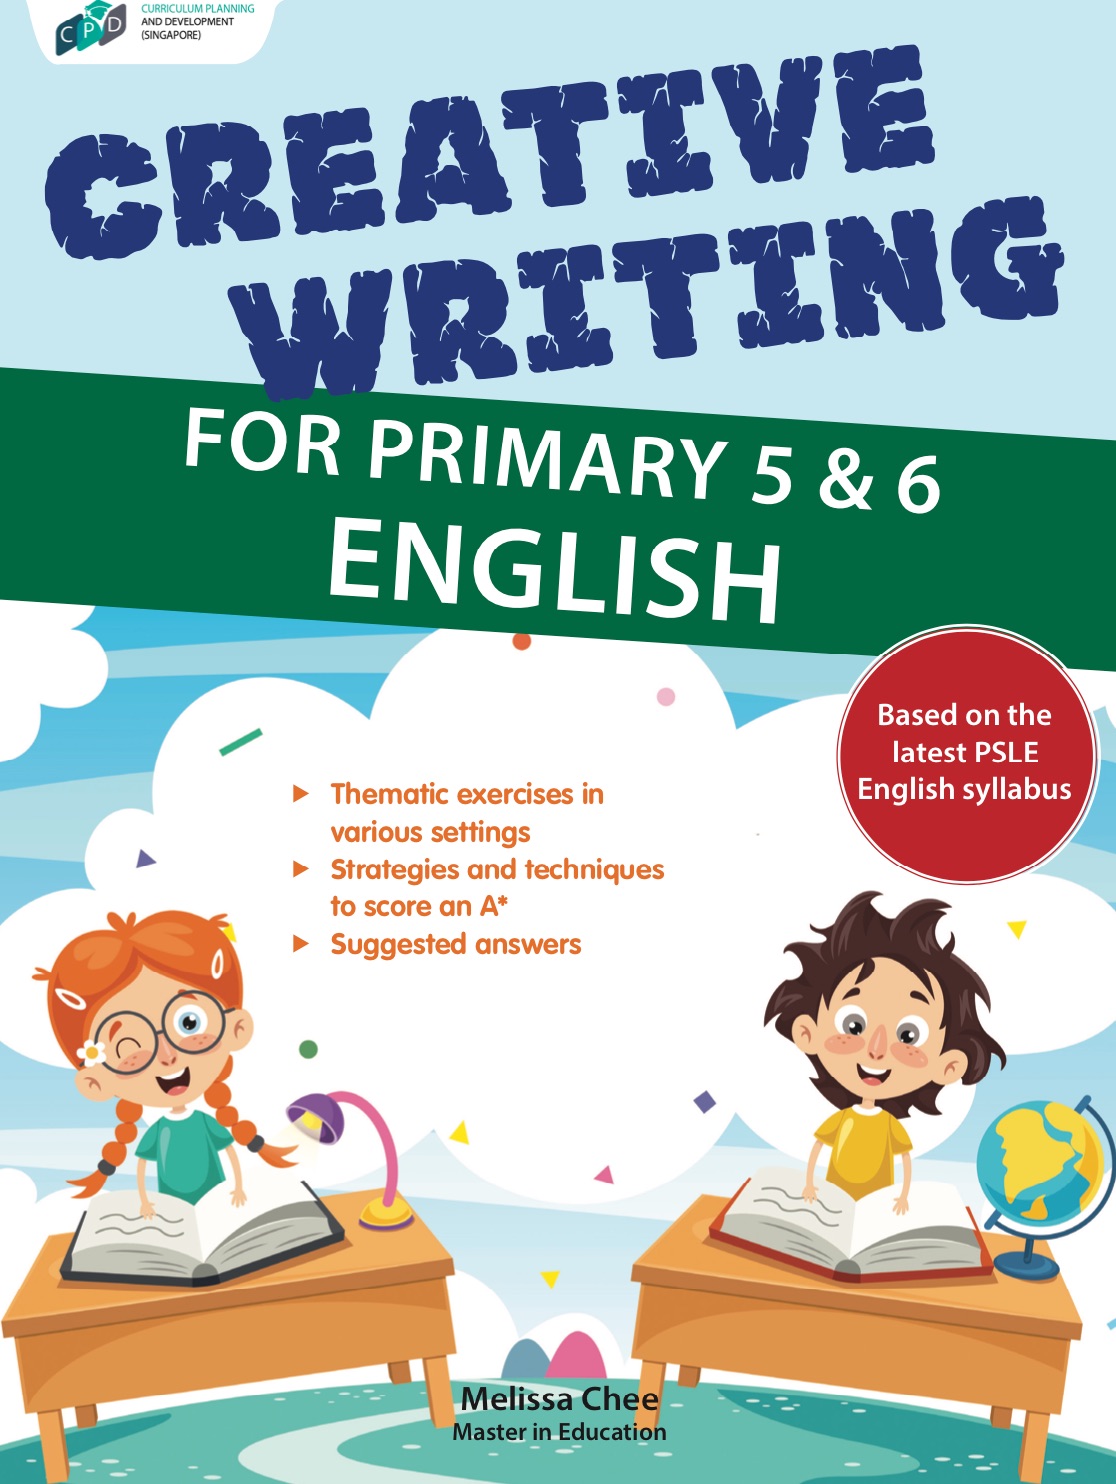 lesson note on essay writing for primary 5